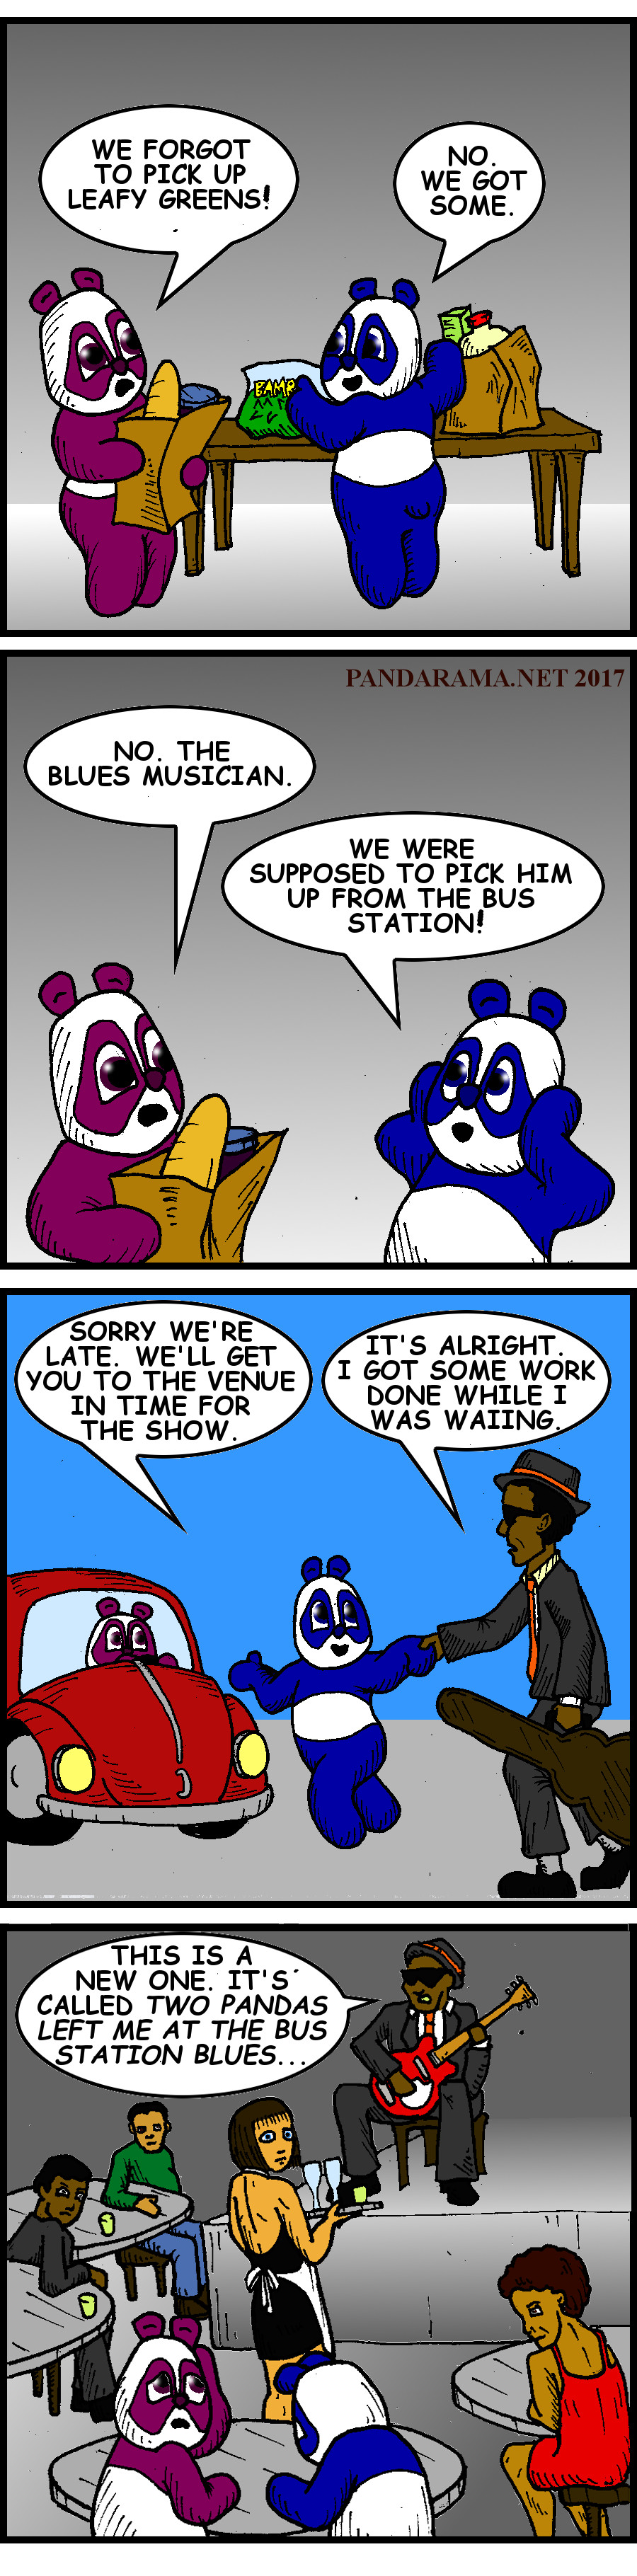 Cartoon where pandas forget to pickup a blues performer for his gig, so he writes a song about them while he's waiting.